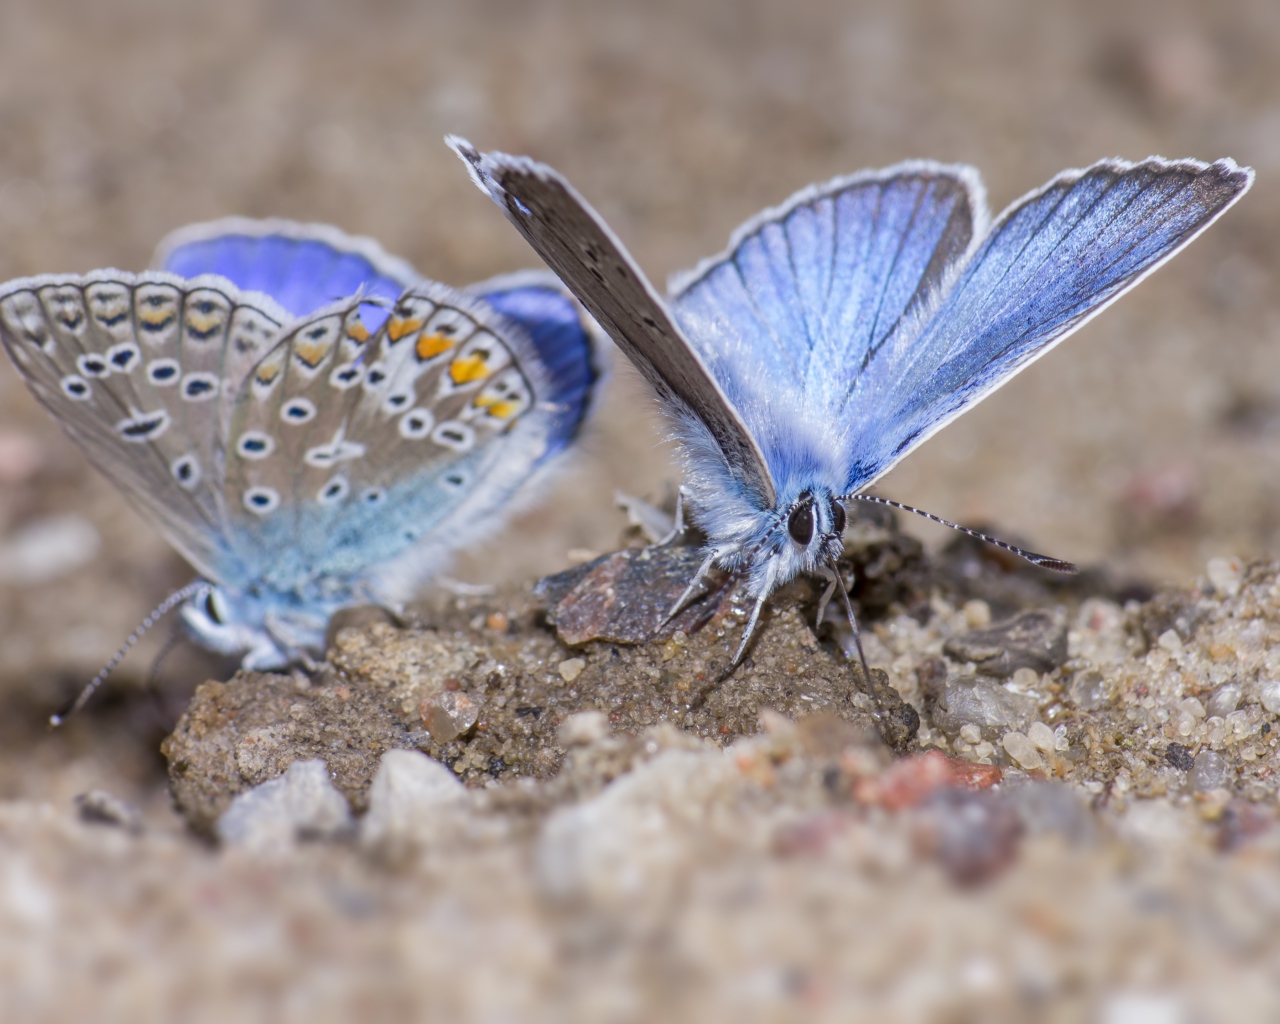 Two blue butterflies are sitting on the sand